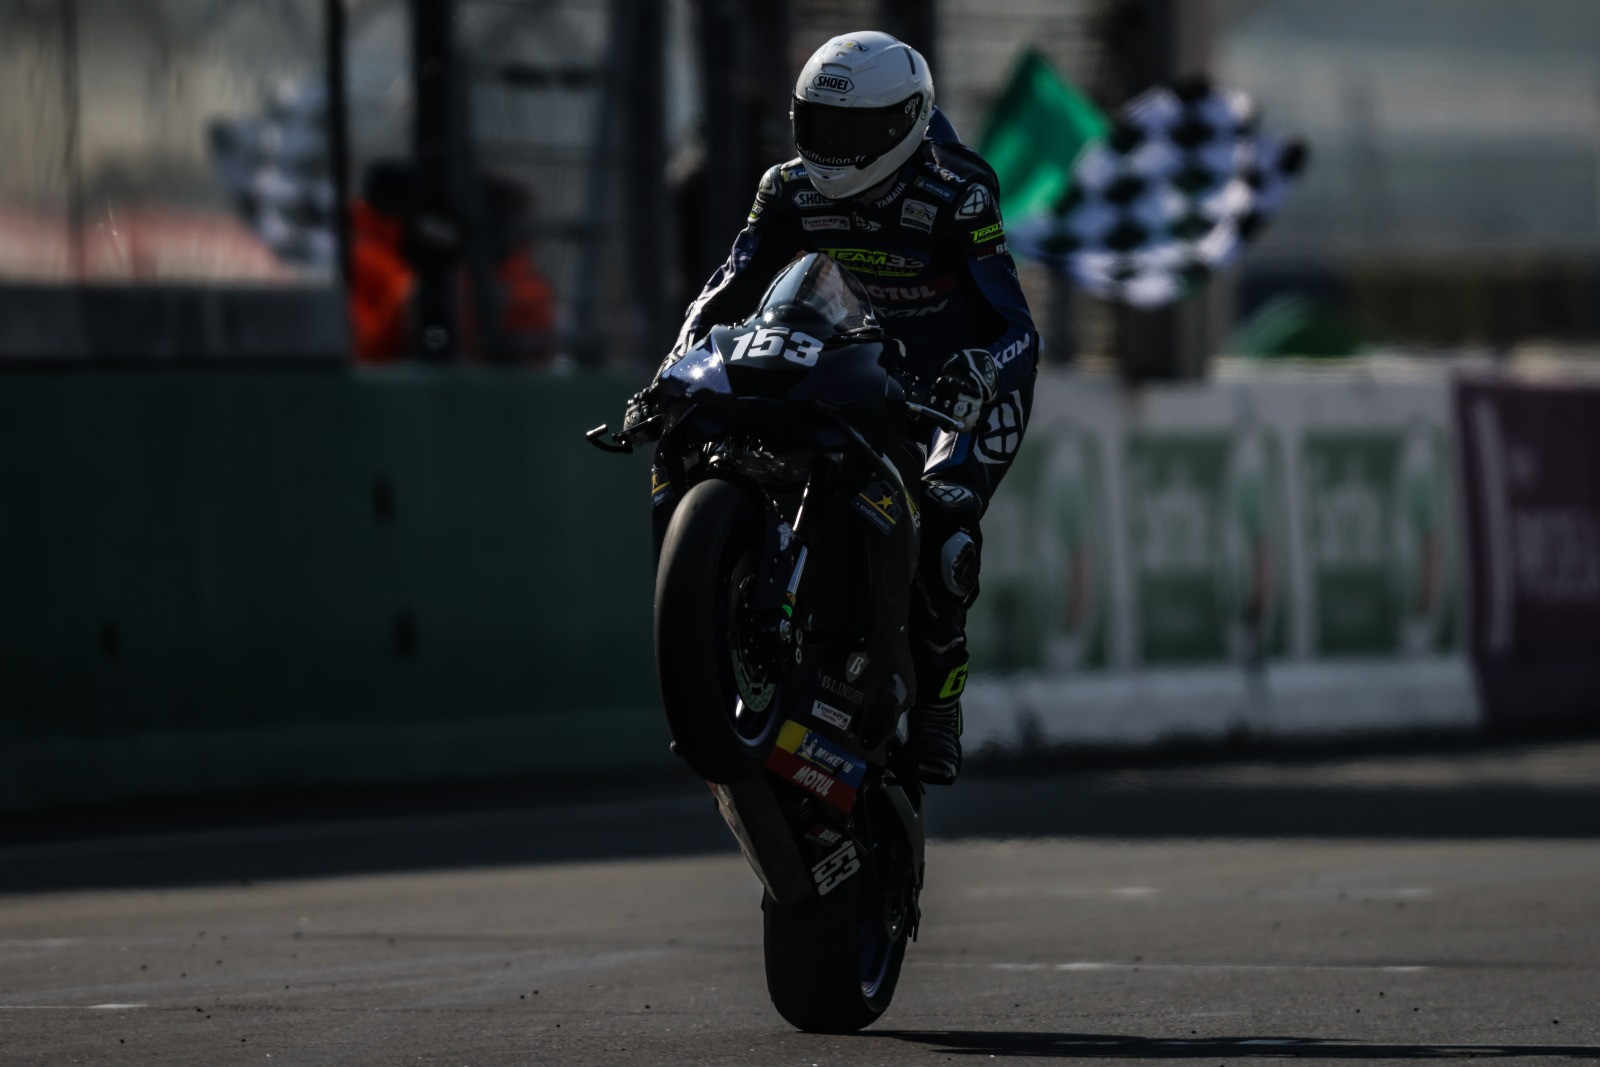 Former MotoAmerica regular Valentin Debise (153) celebrates one of his four race victories at Le Mans. Photo courtesy Team33accessoires.fr by VRT81.